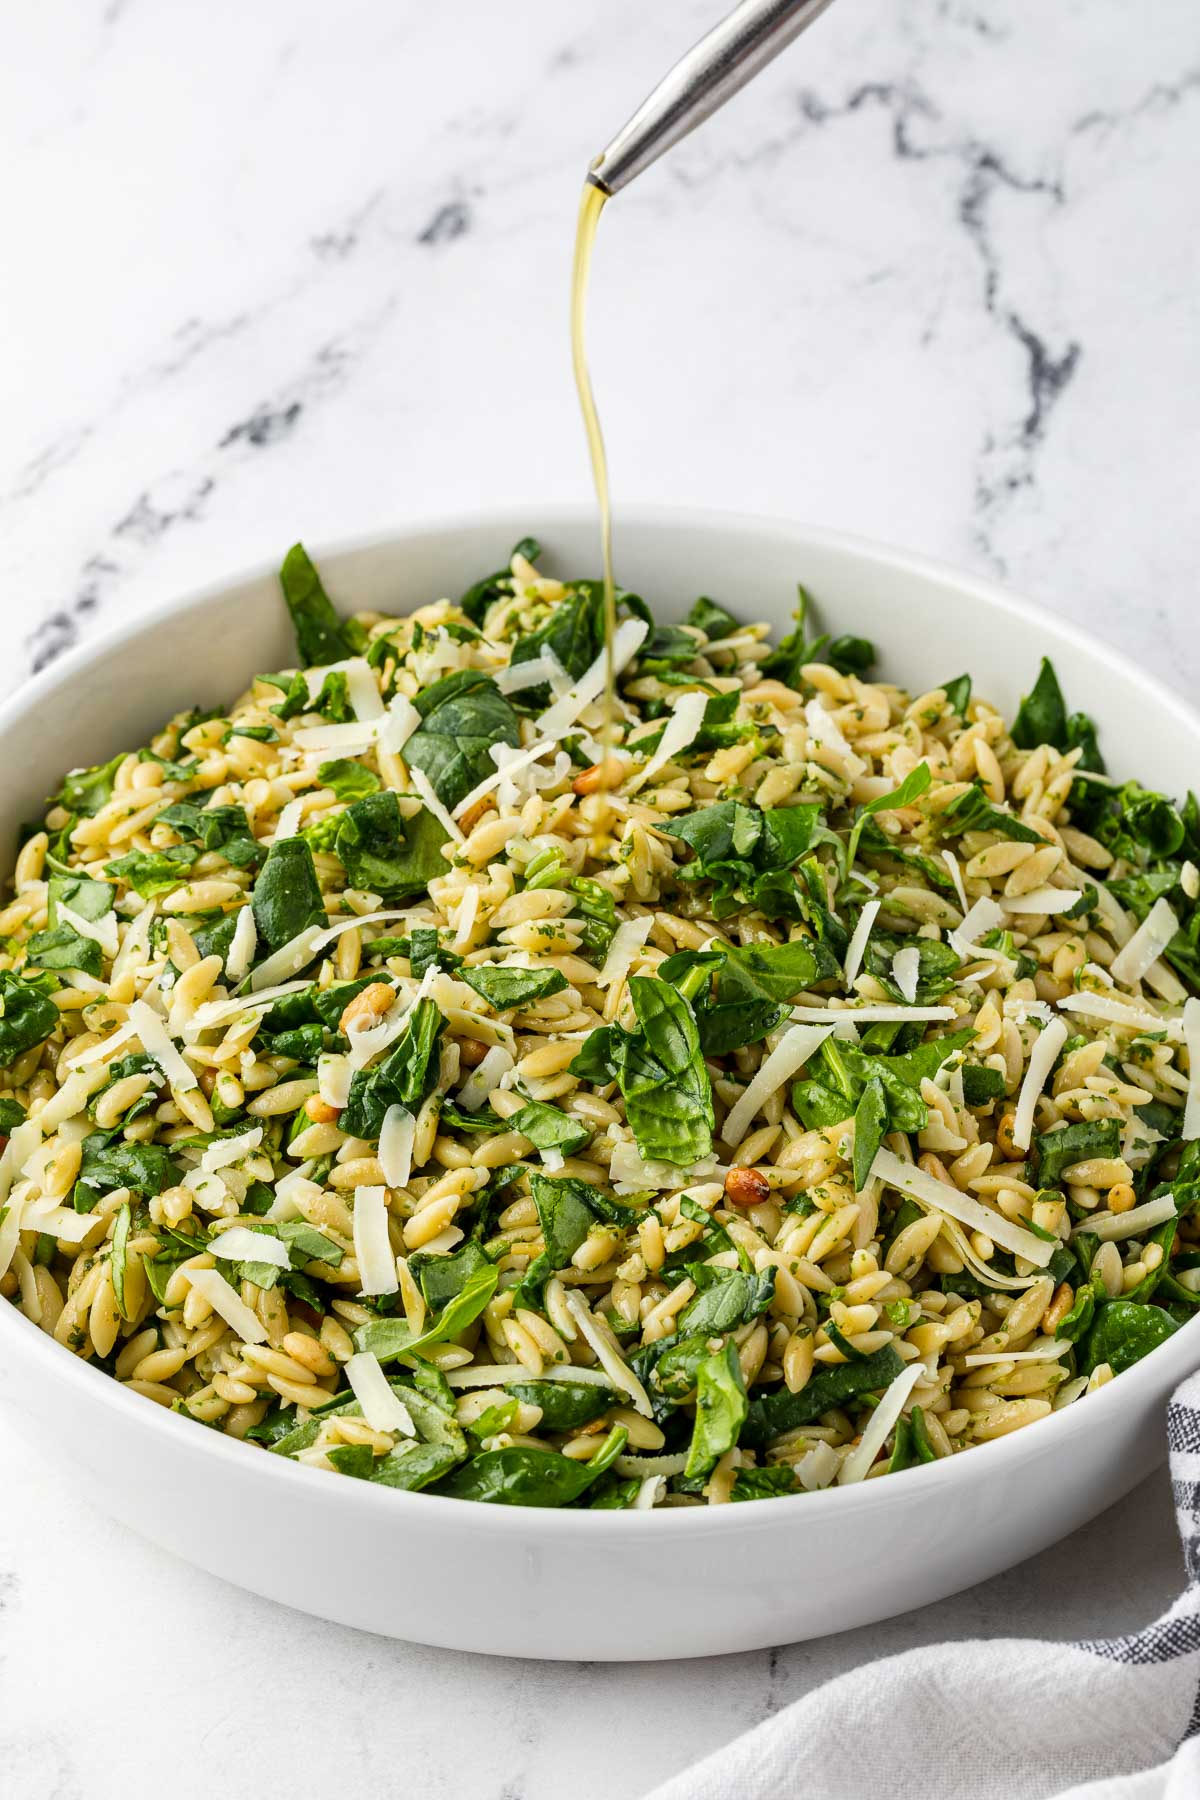 A closeup of a white bowl of pesto orzo salad with chopped spinach, parmesan and pine nuts visible on the top, and with someone drizzling olive oil over the bowl.